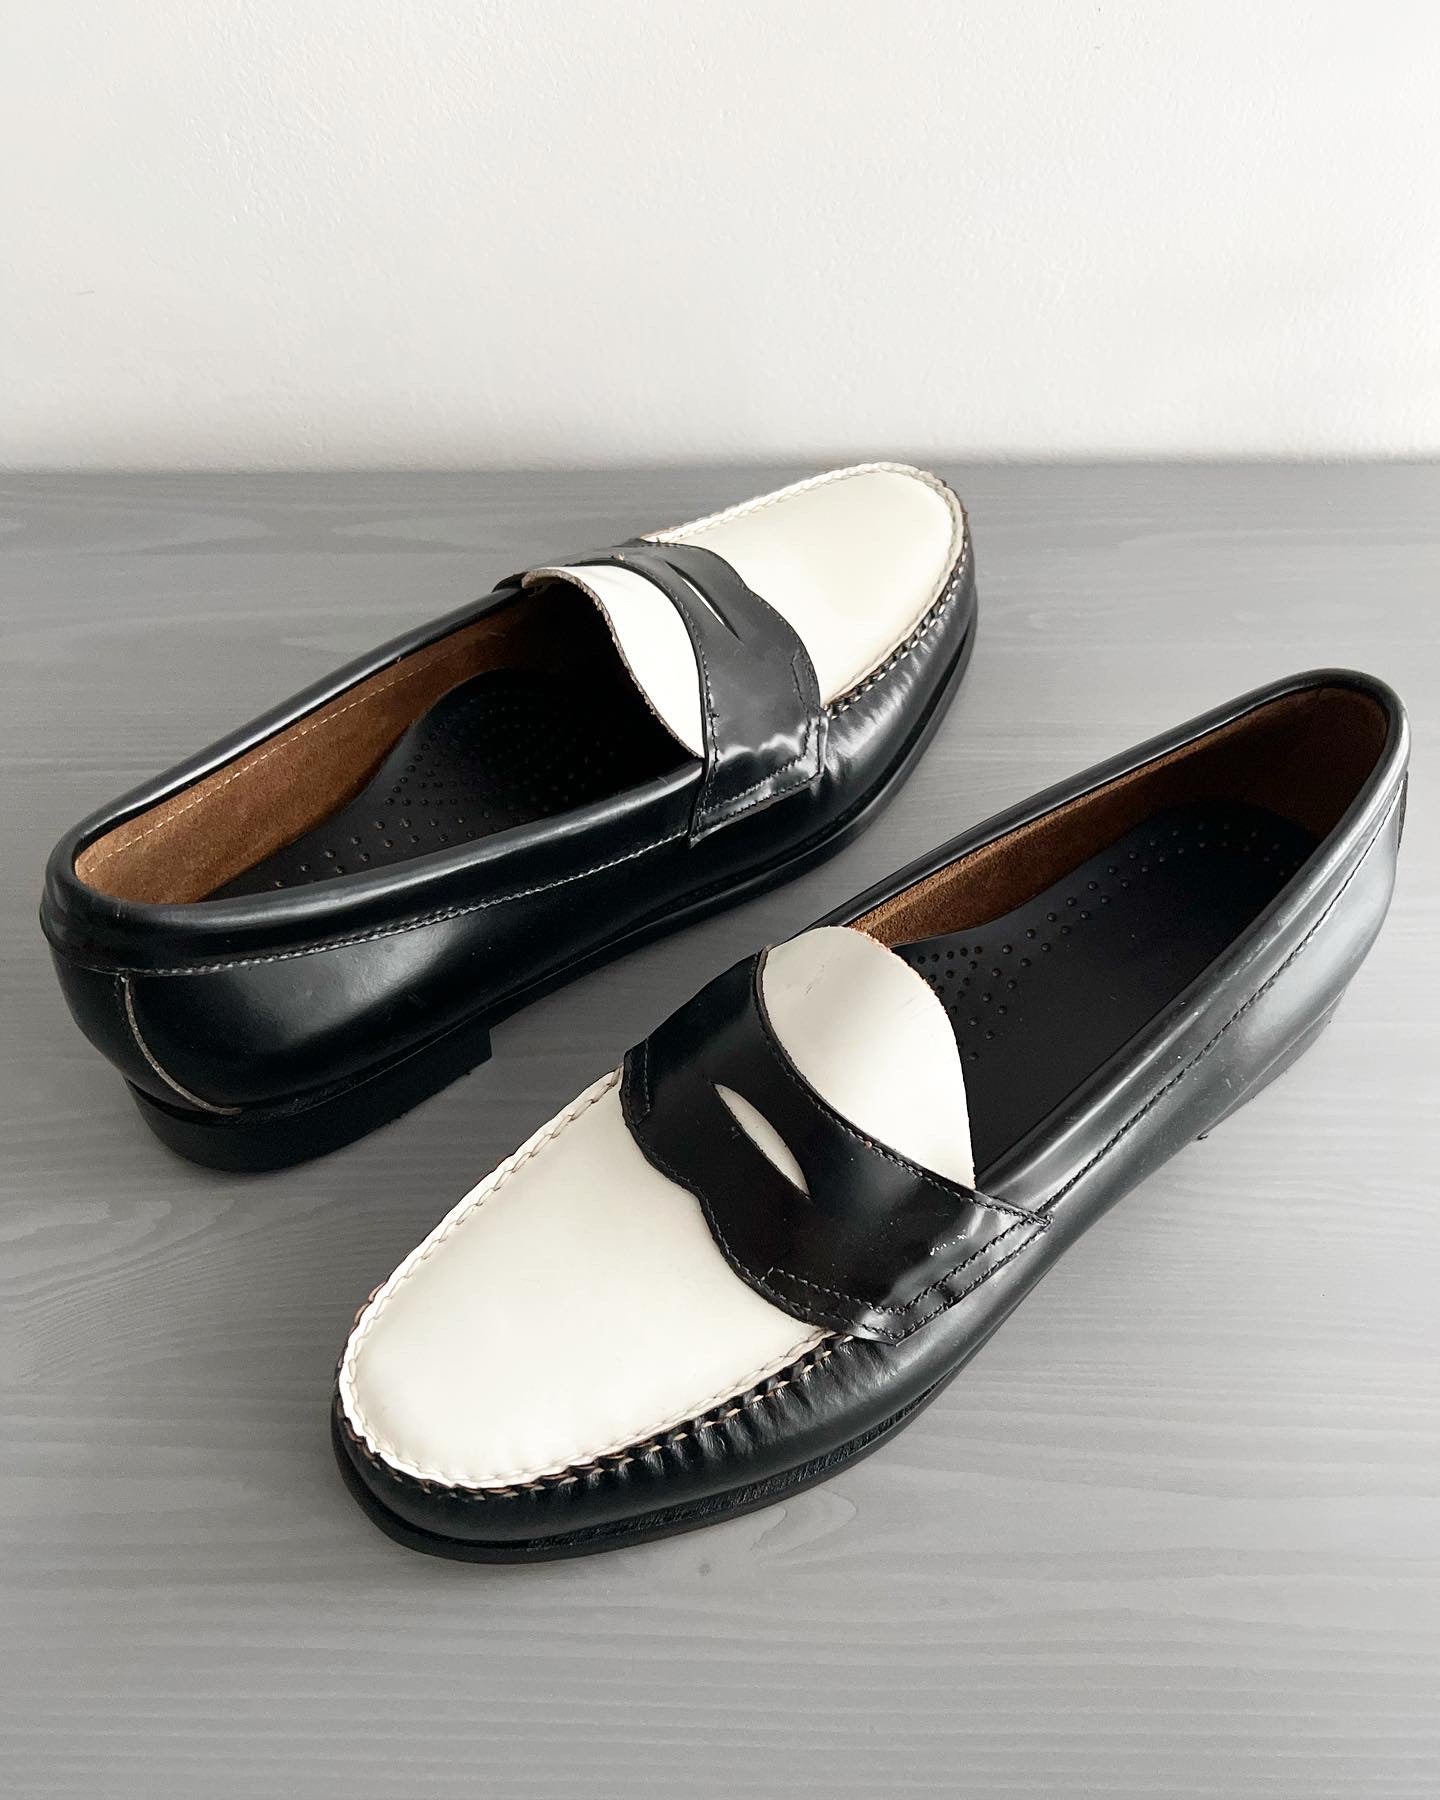 G.H. Bass Weejuns Logan Penny Loafers - Size US10.5 – NDWC0 Shop